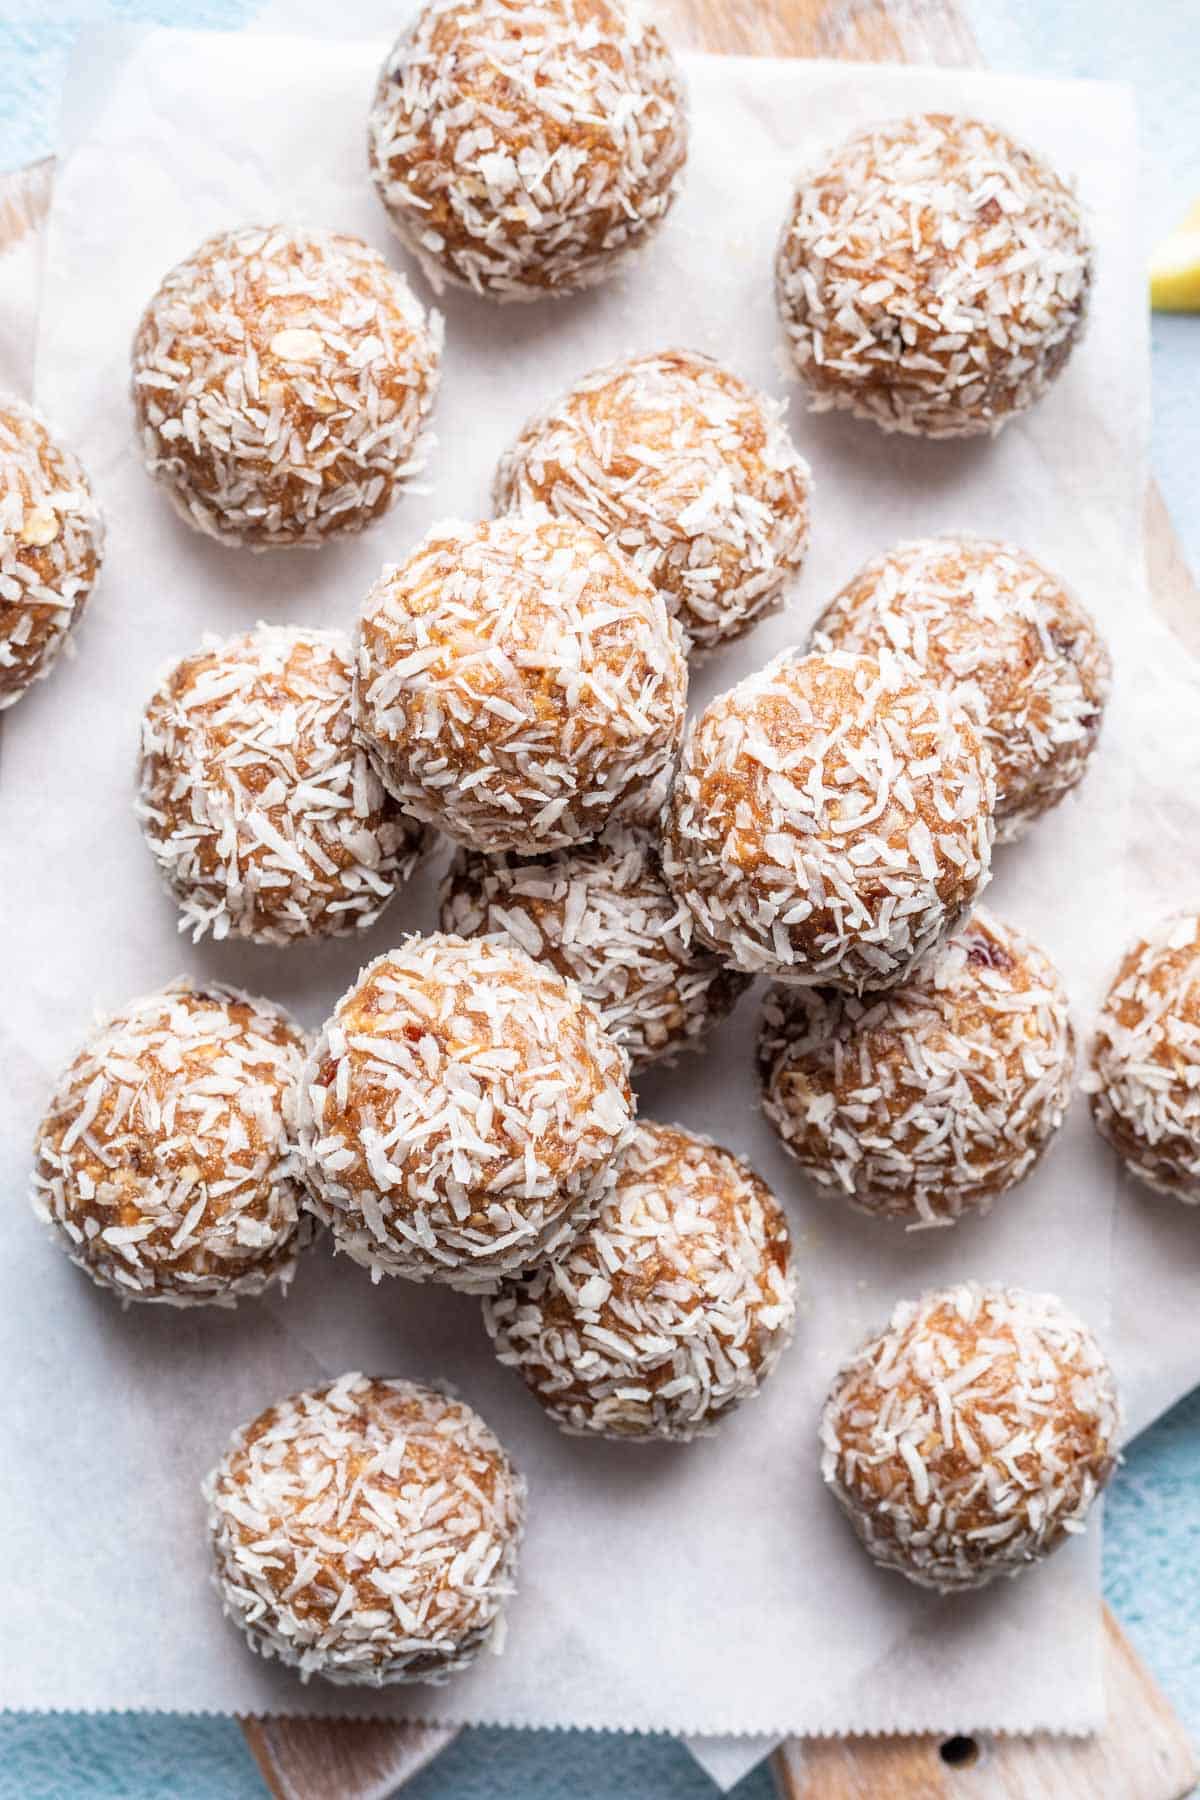 Lemon bliss balls rolled in desiccated coconut and stacked on a serving board.